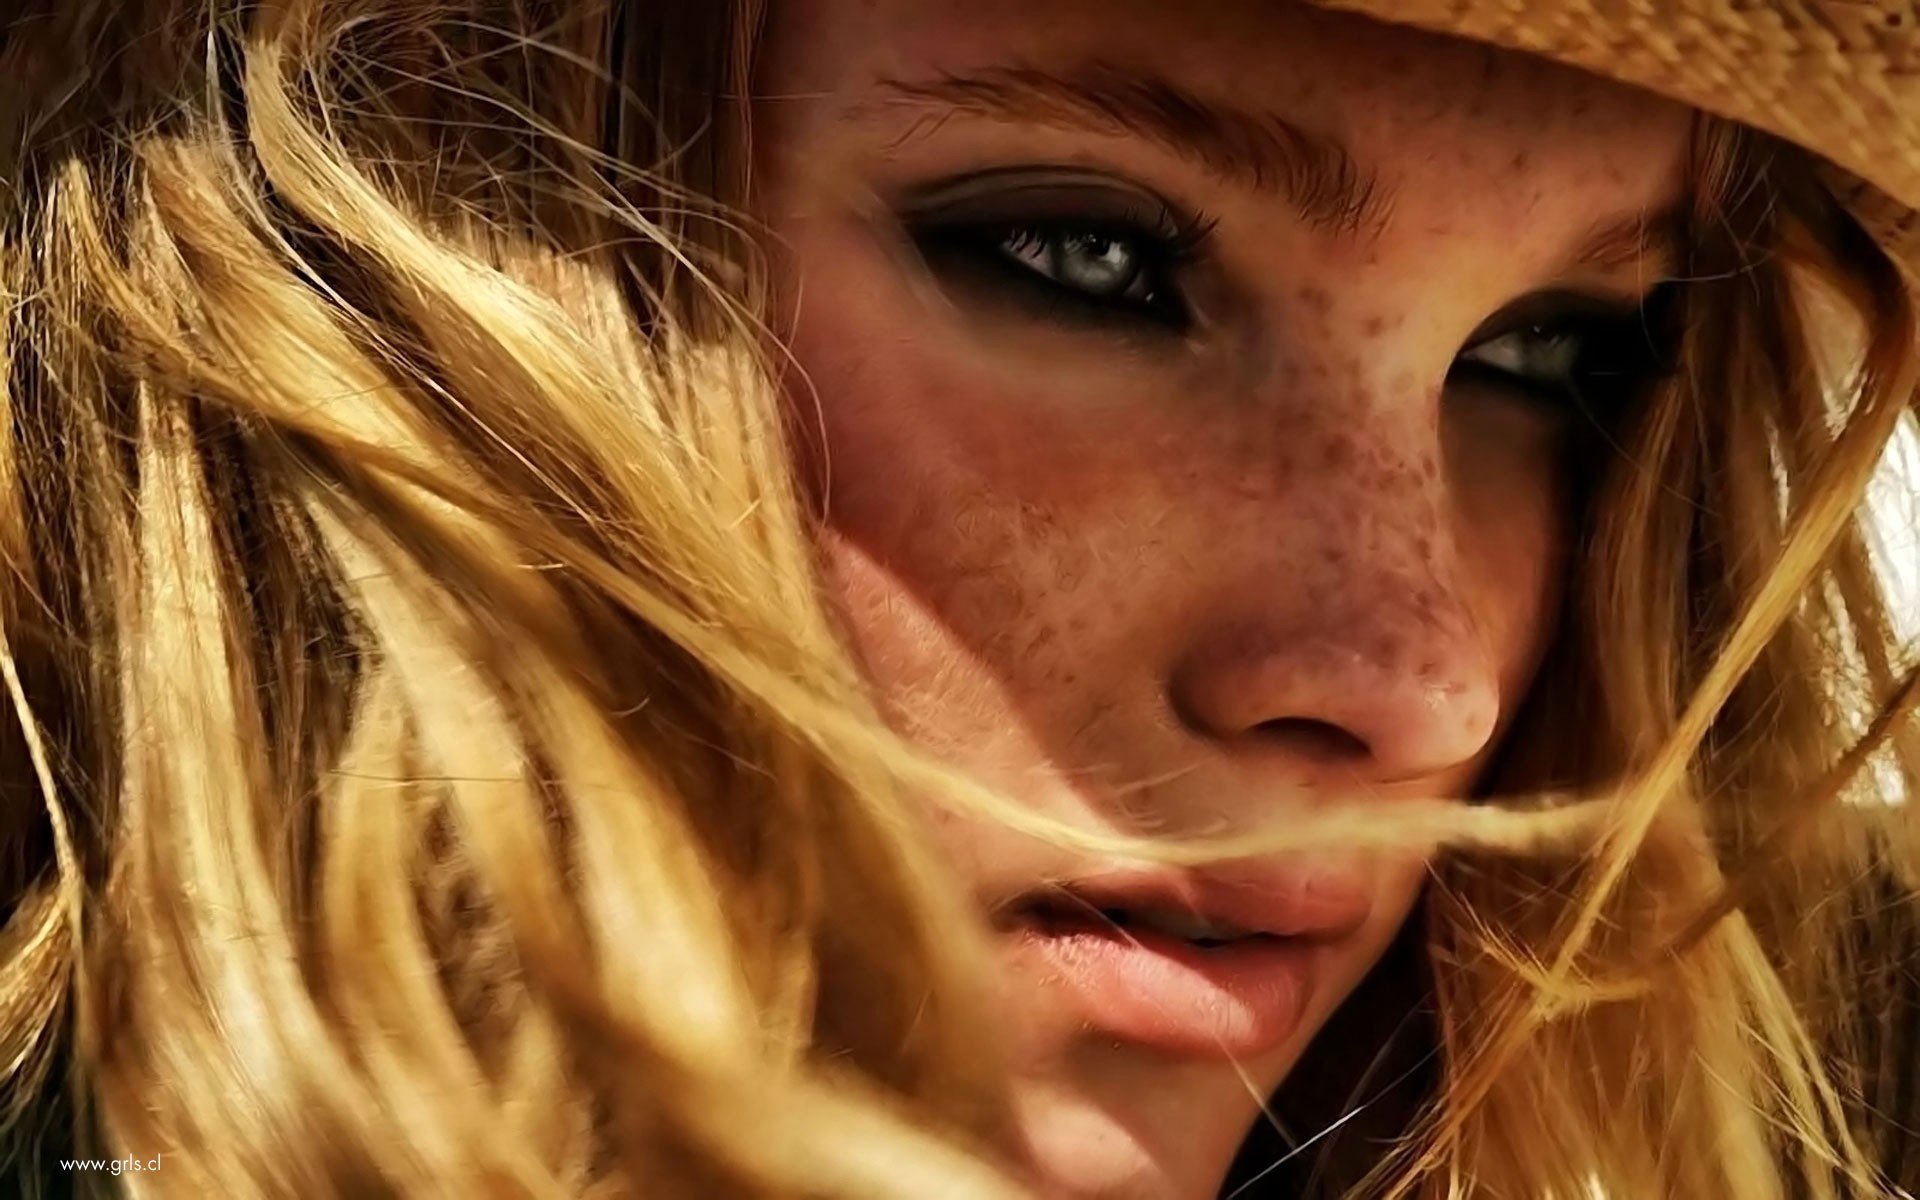 1. How to Embrace Your Freckles and Blonde Hair - wide 7